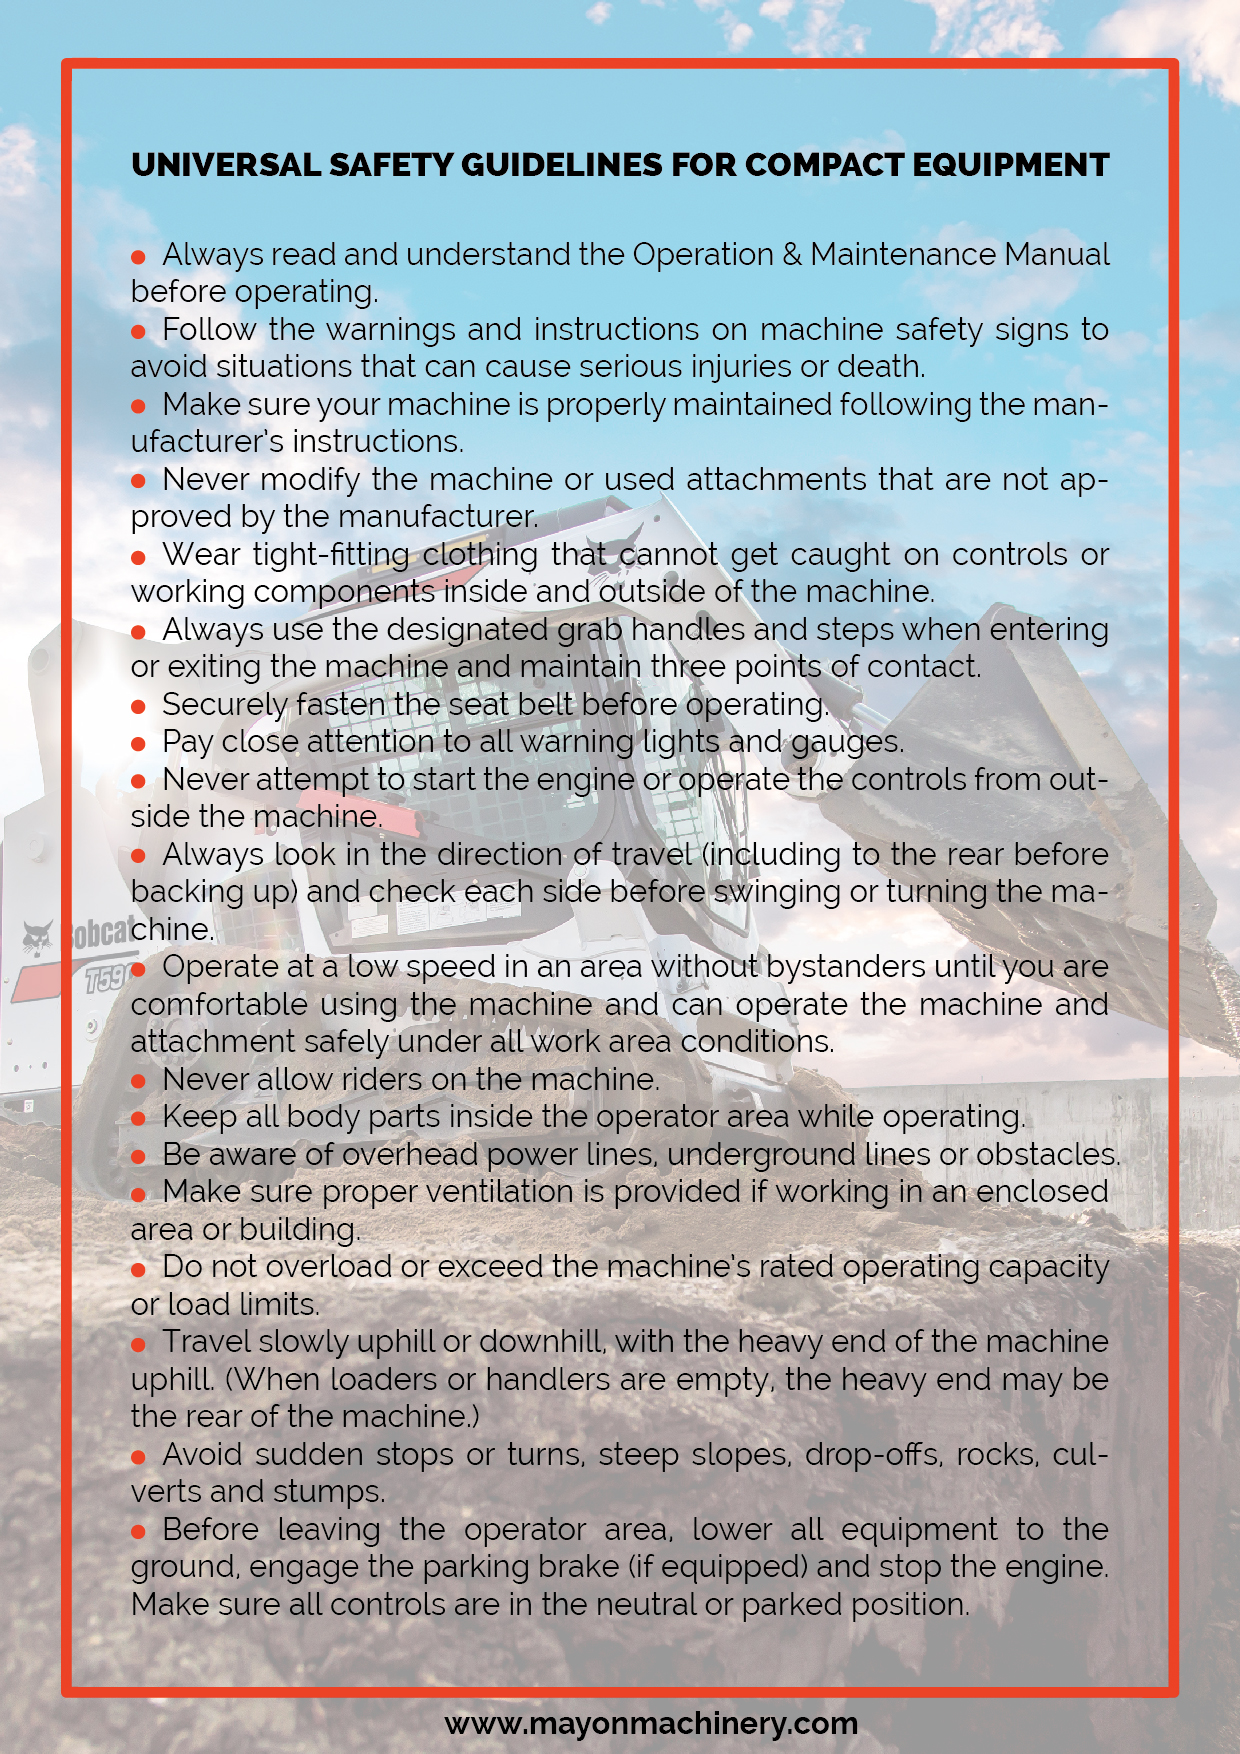 Universal Safety Guidelines for Compact Equipment